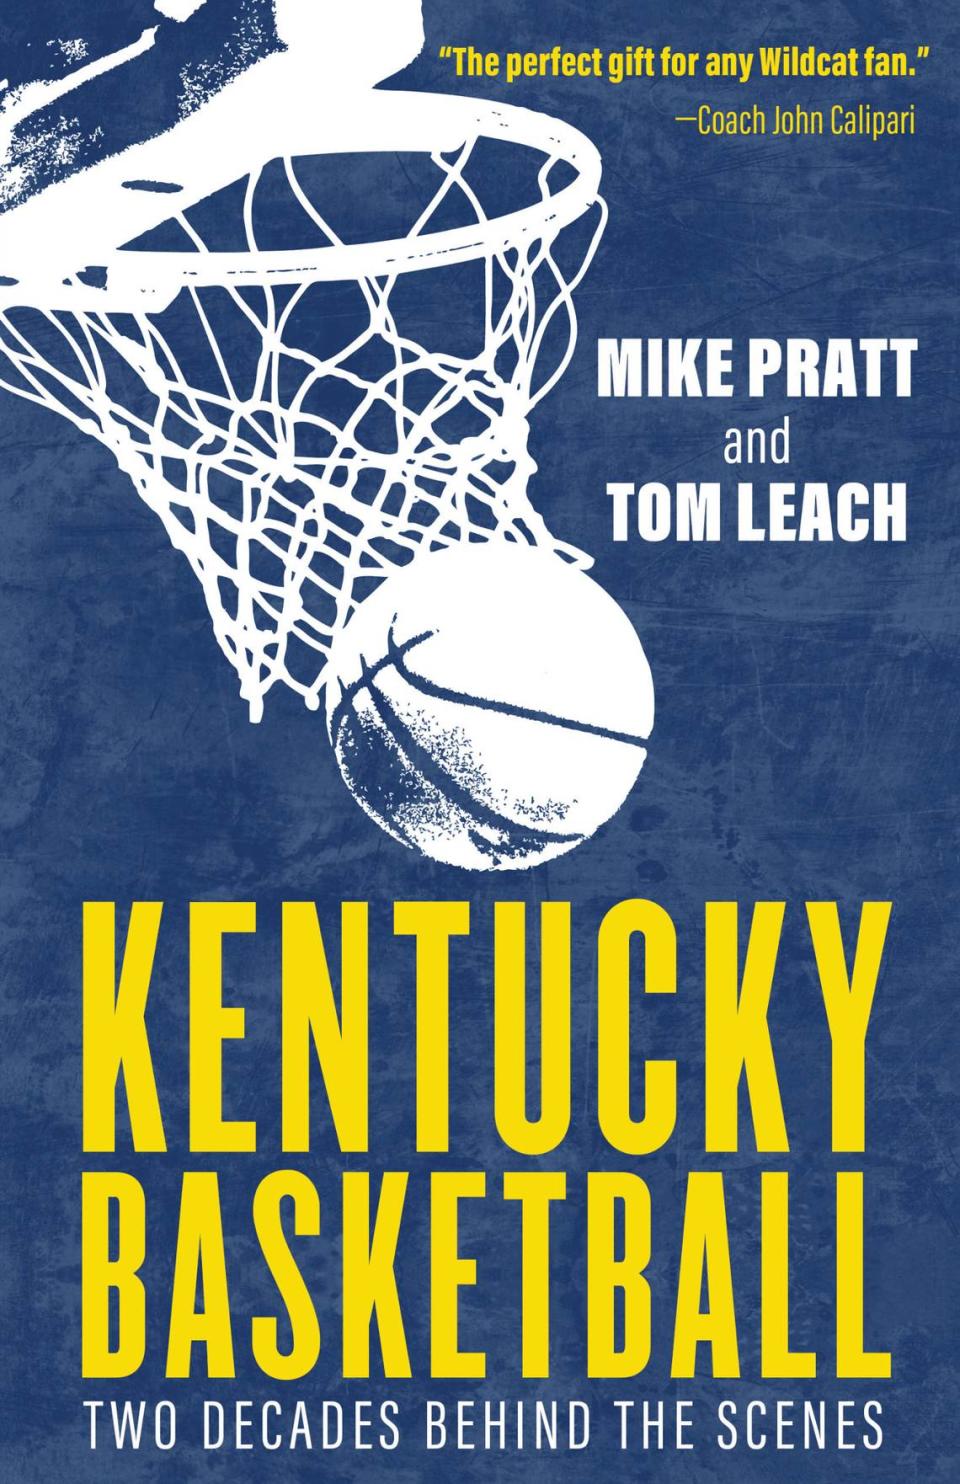 “Kentucky Basketball: Two Decades Behind The Scenes” contains UK anecdotes gleaned by radio broadcasters Tom Leach and Mike Pratt.